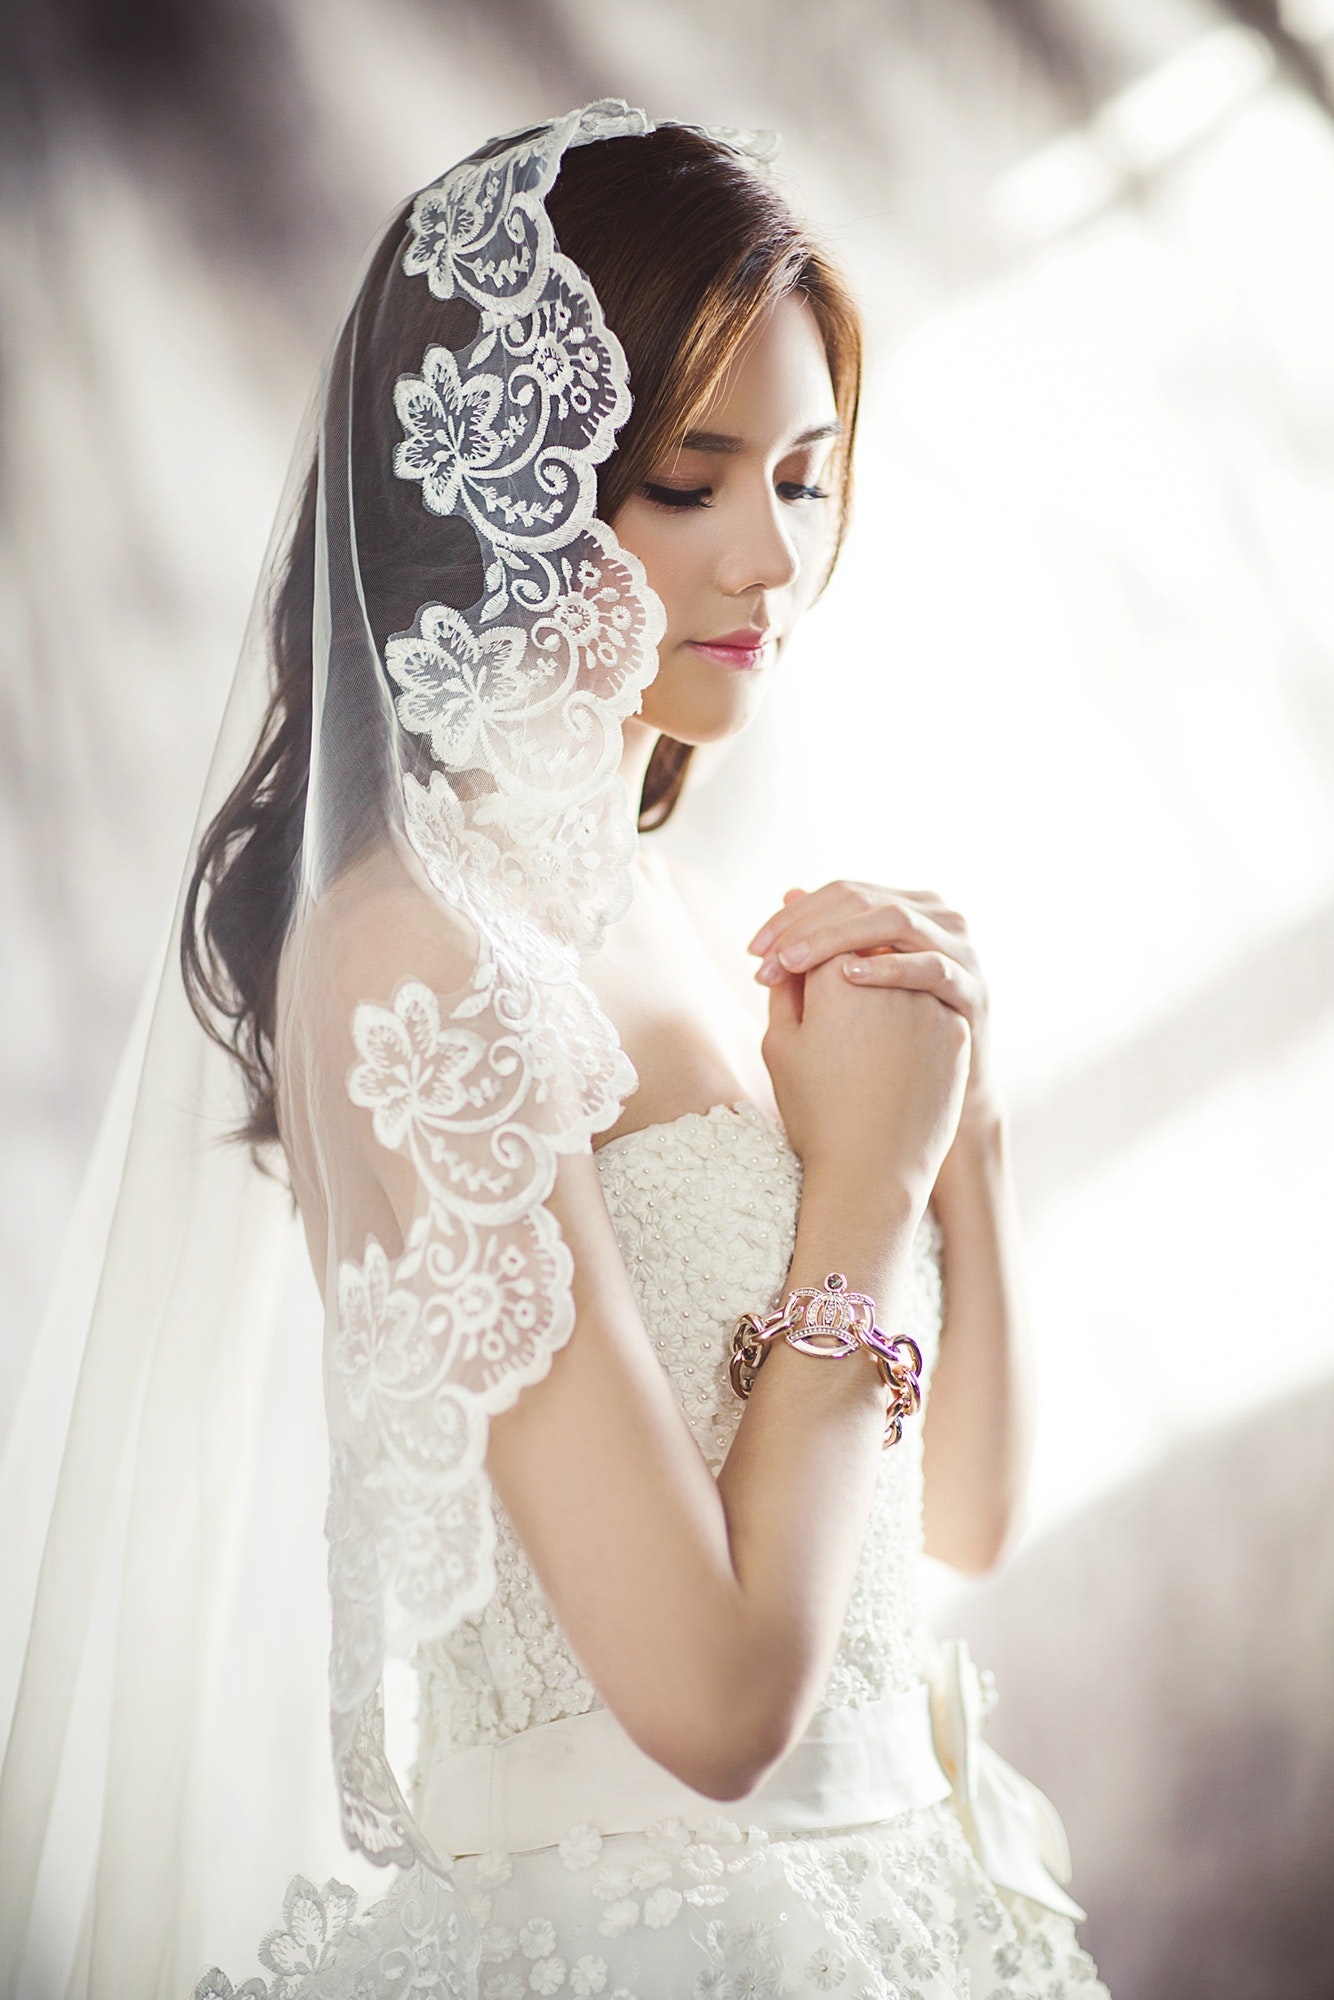 woman-in-white-bridal-gown-meditating-157757